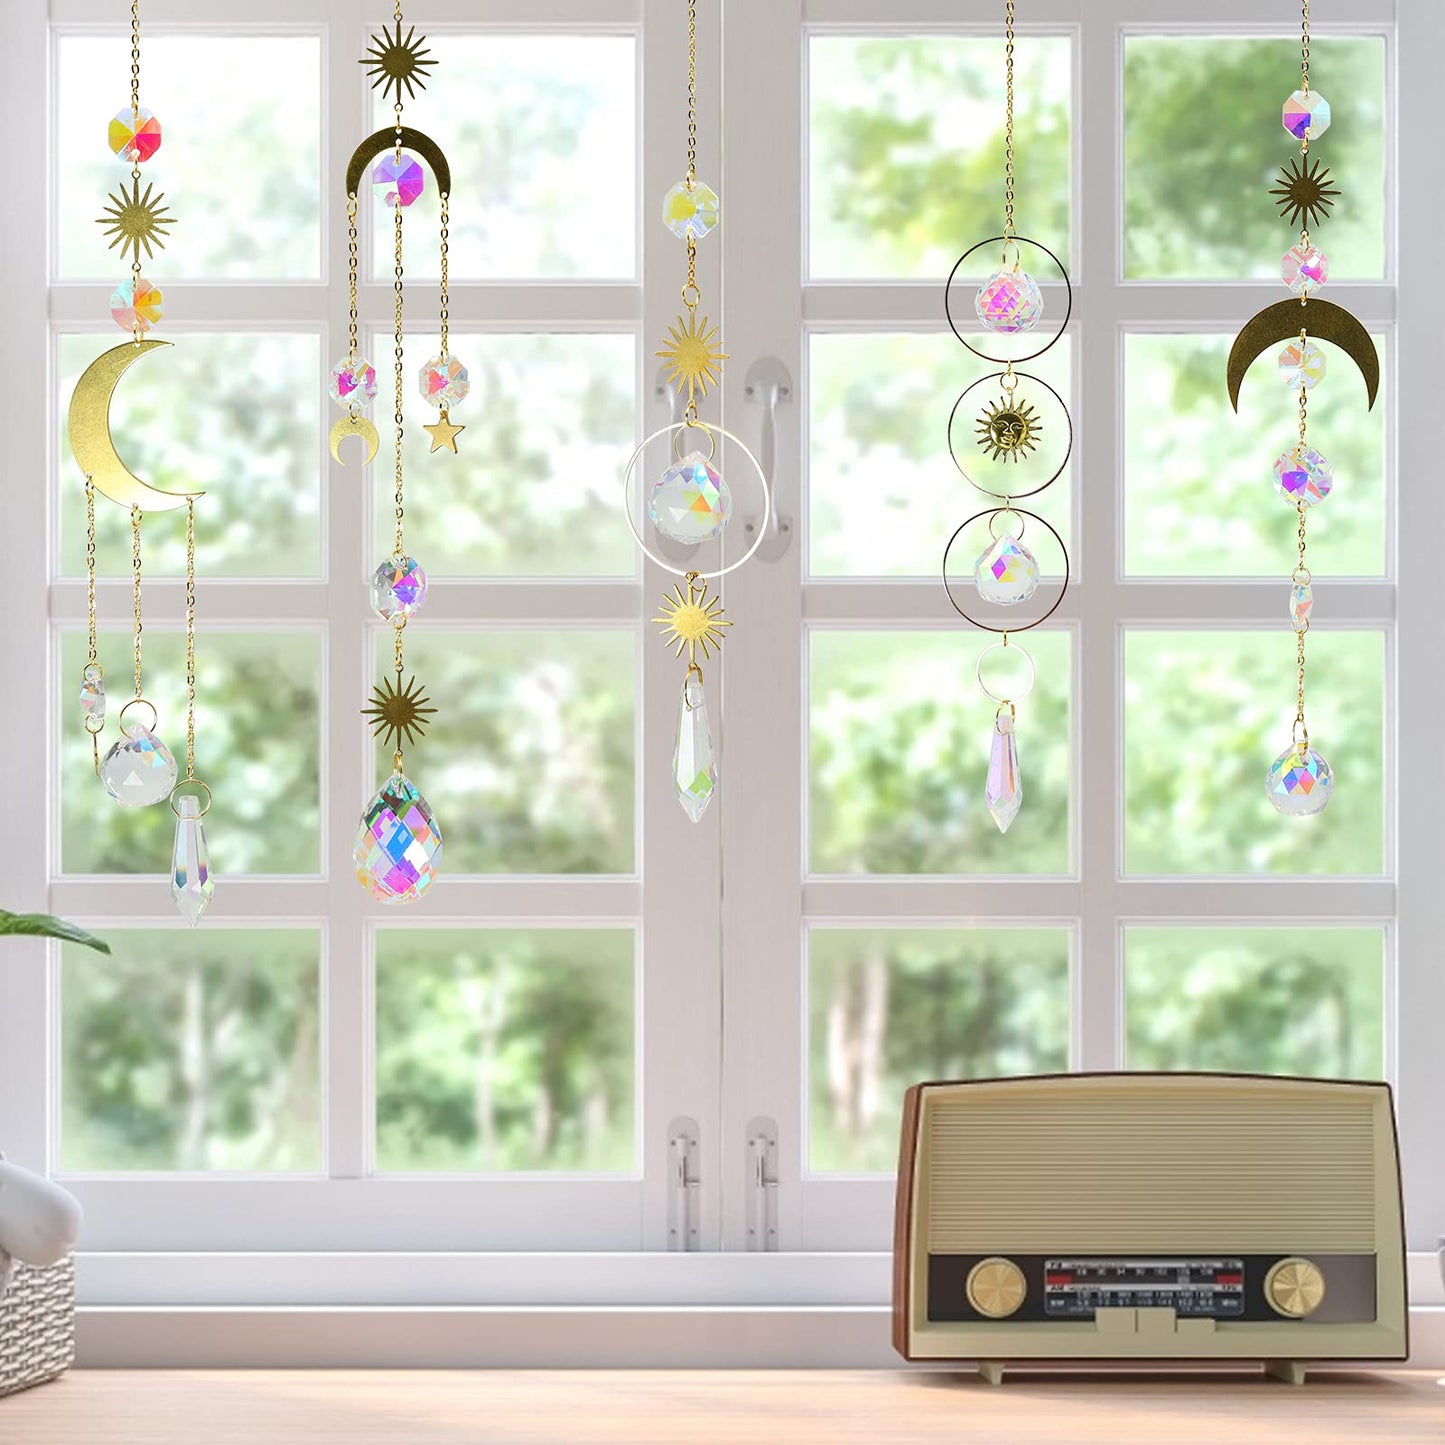 6Pieces Colorful Crystals Suncatcher Hanging Sun Catcher with Chain Pendant Ornament Crystal Balls for Window Home Garden Christmas Day Party Wedding Decoration